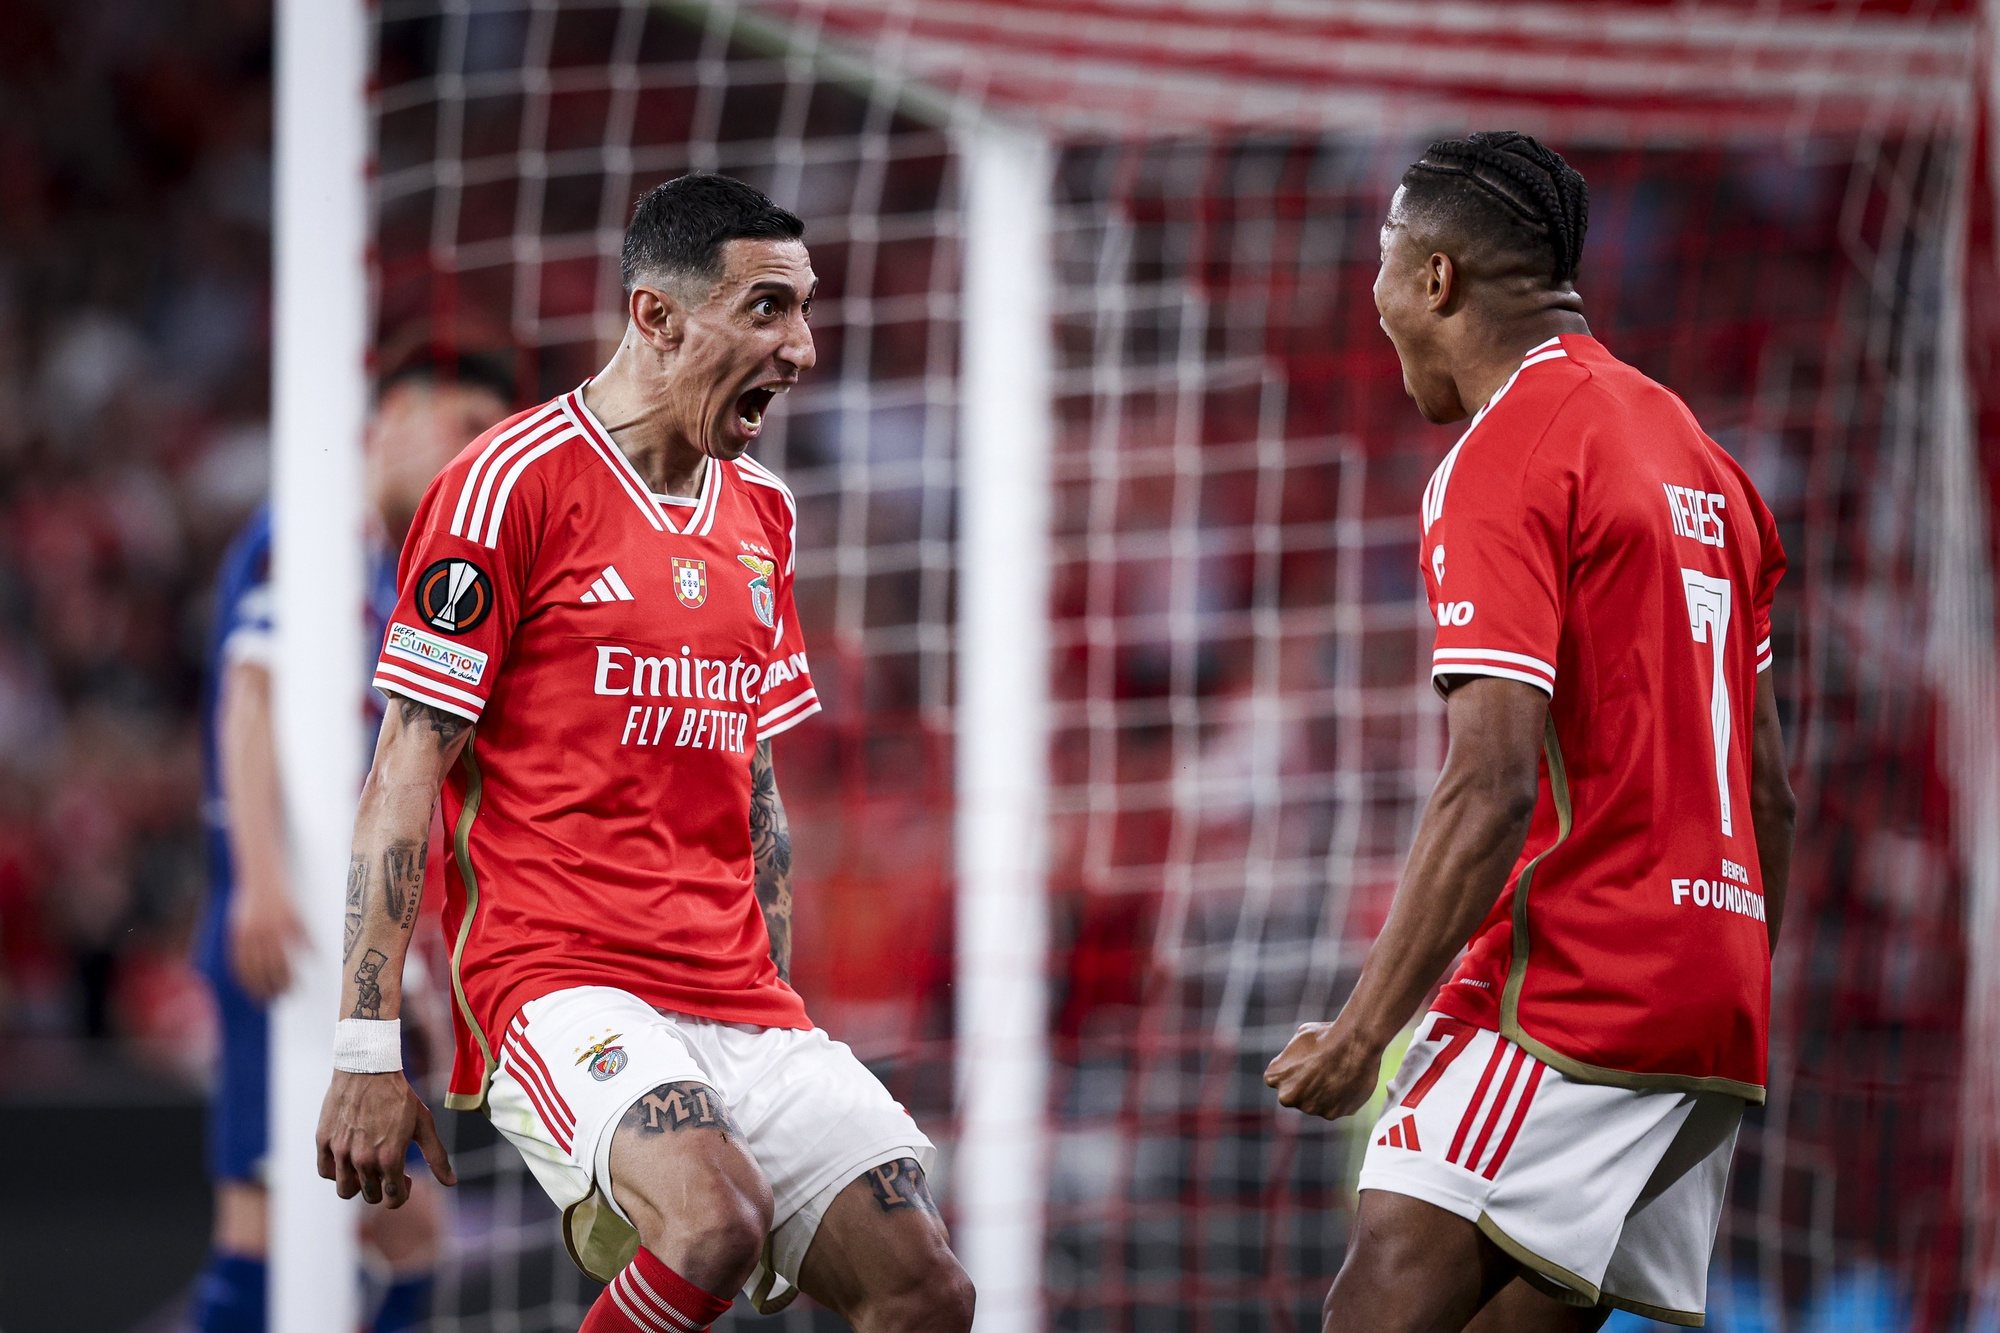 Benfica player Di Maria (L) celebrates with Benfica player David Neres after scoring a goal during the UEFA Europe League quarter-final first leg soccer match between Benfica and Olympique de Marseille held at Luz Stadium, in Lisbon, Portugal, 11 April 2024. FILIPE AMORIM/LUSA